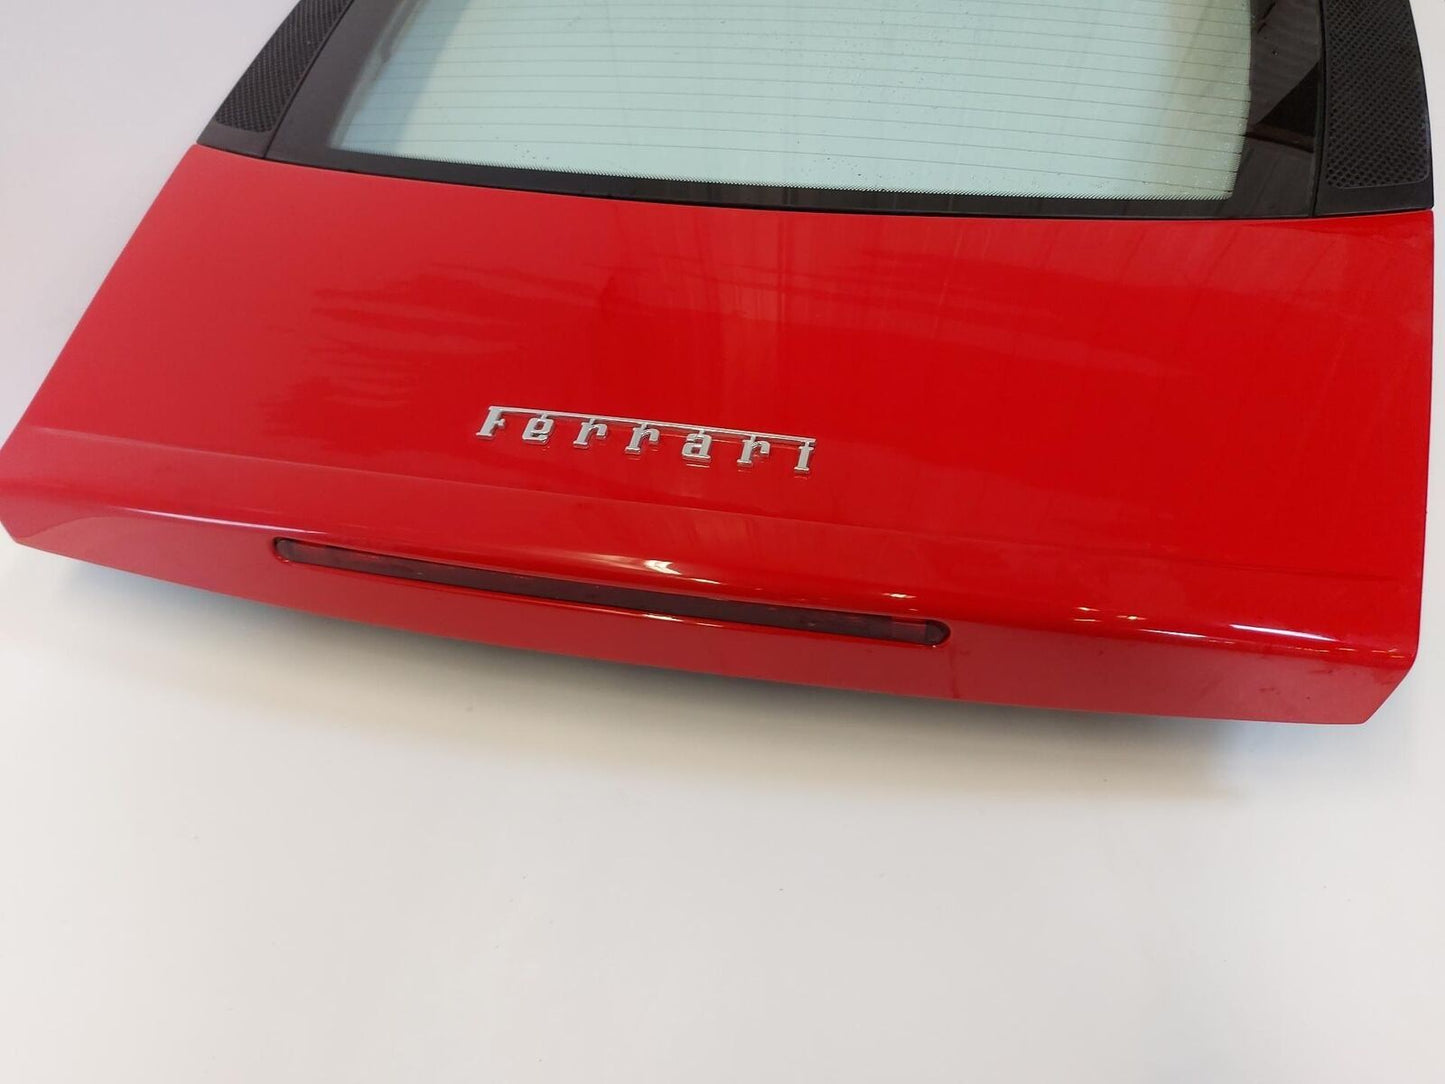 2000 Ferrari 360 Modena Engine Deck Lid Hood with Glass hatch tailgate Red Clean